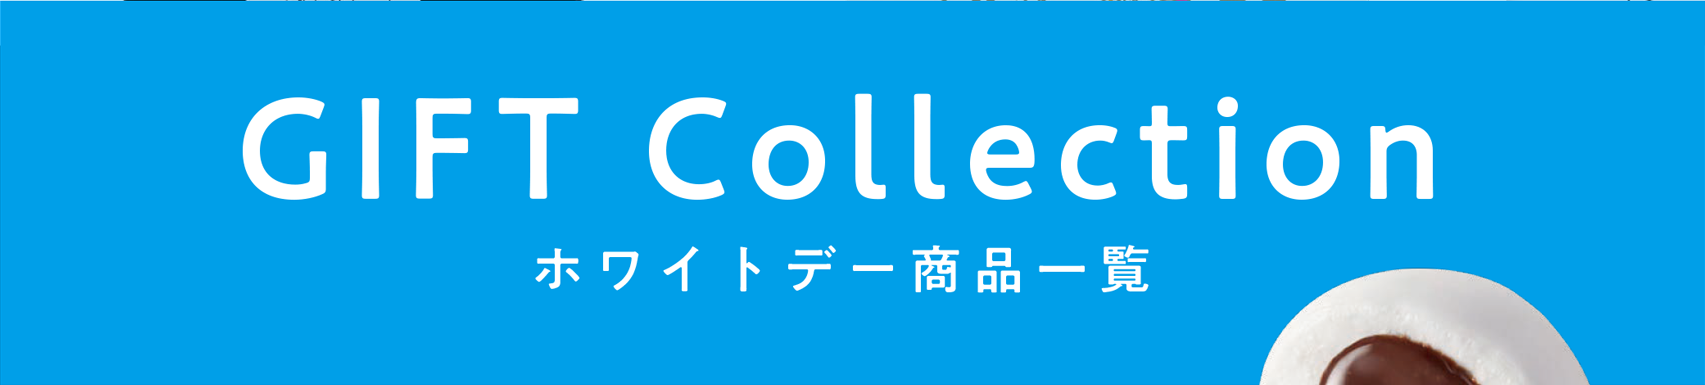 GIFT Collection ホワイトデー商品一覧